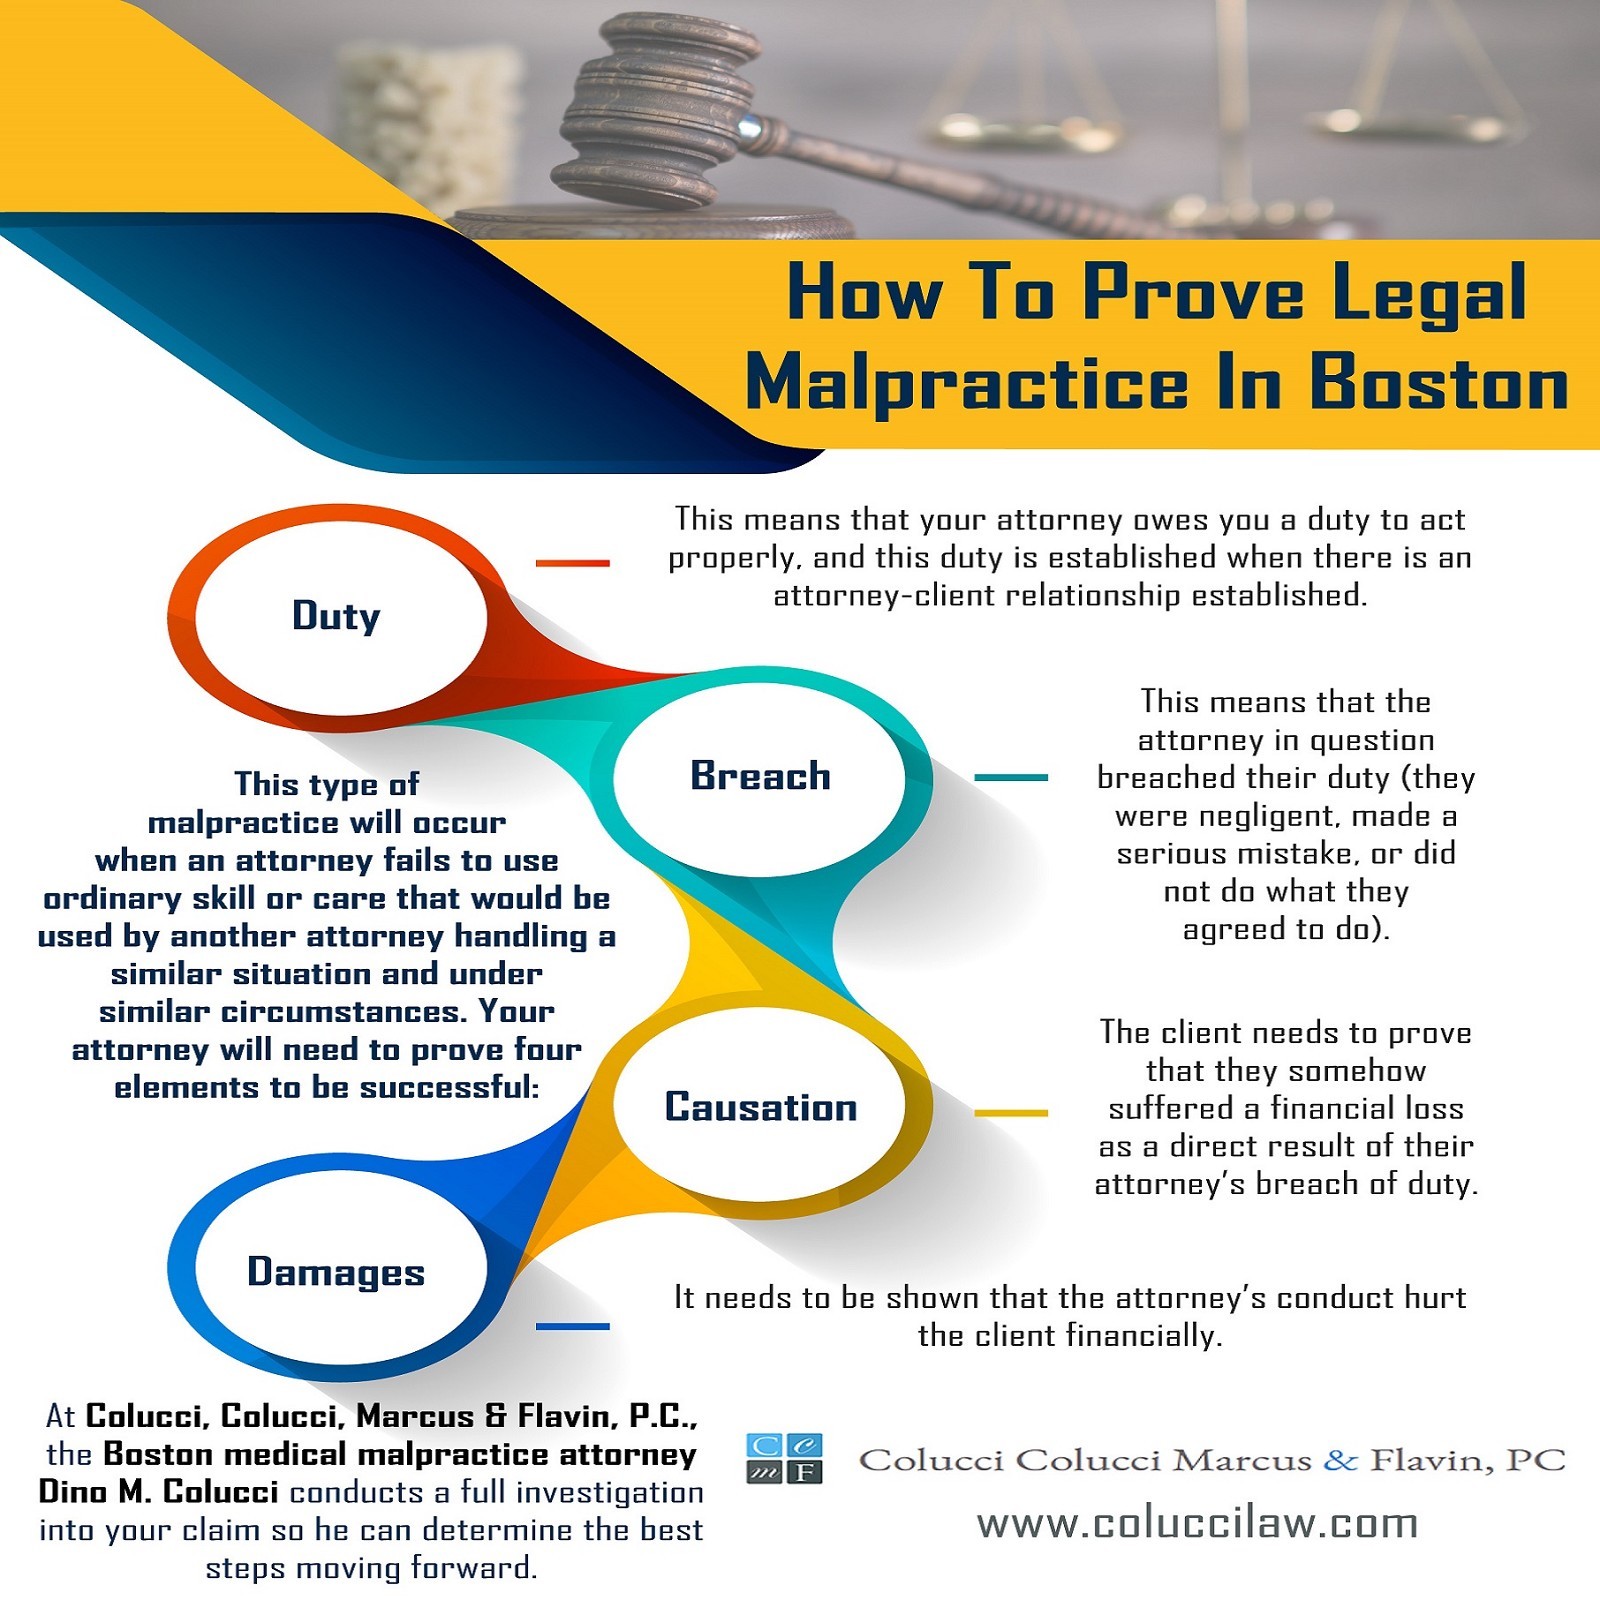 How To Prove Legal Malpractice In Boston?